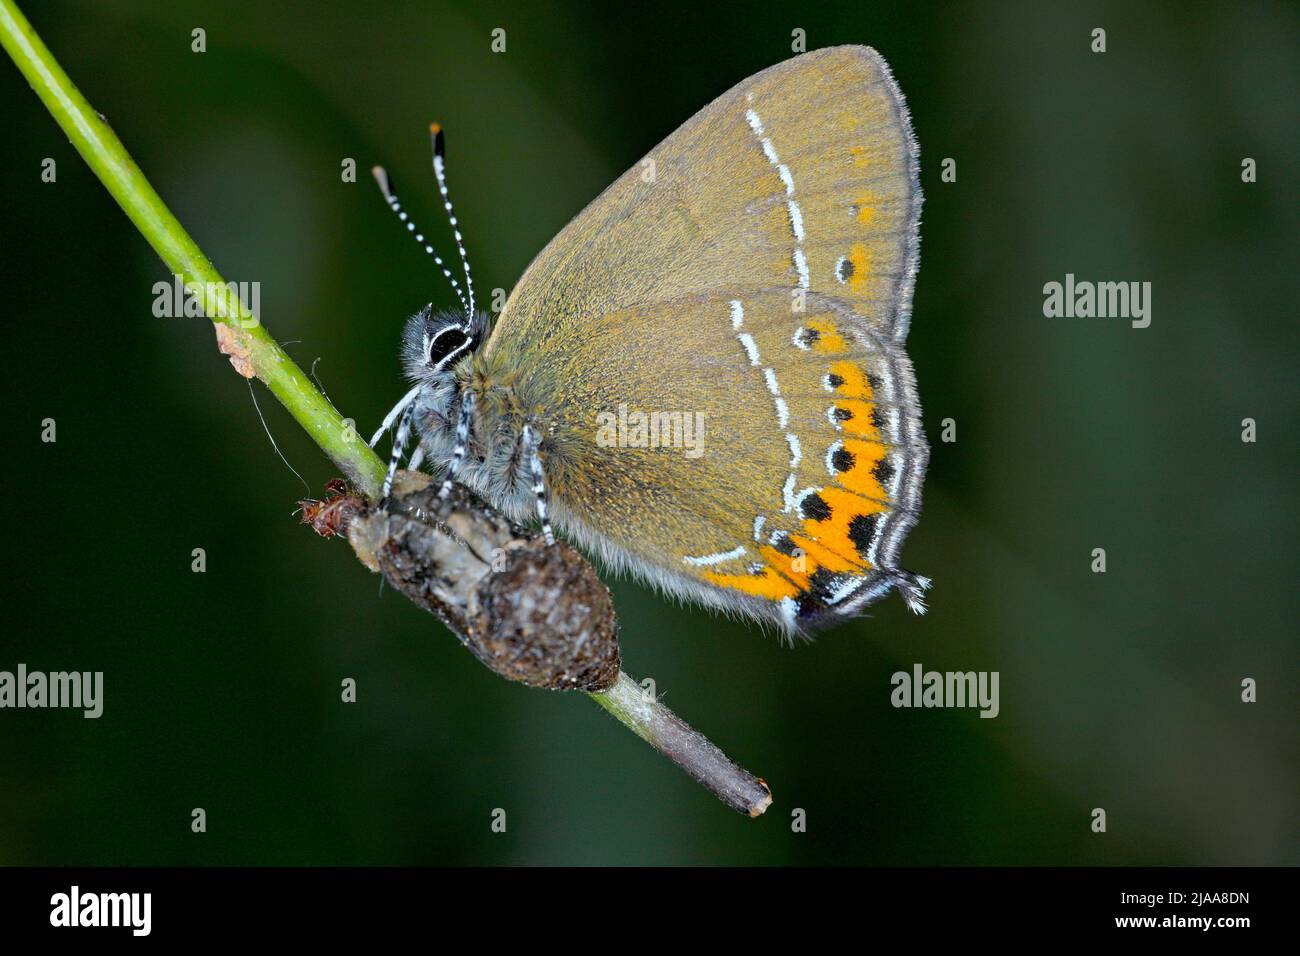 Black Hairstreak (Satyrium pruni, Fixsenia pruni). A young butterfly freshly hatched from a pupa. Stock Photo